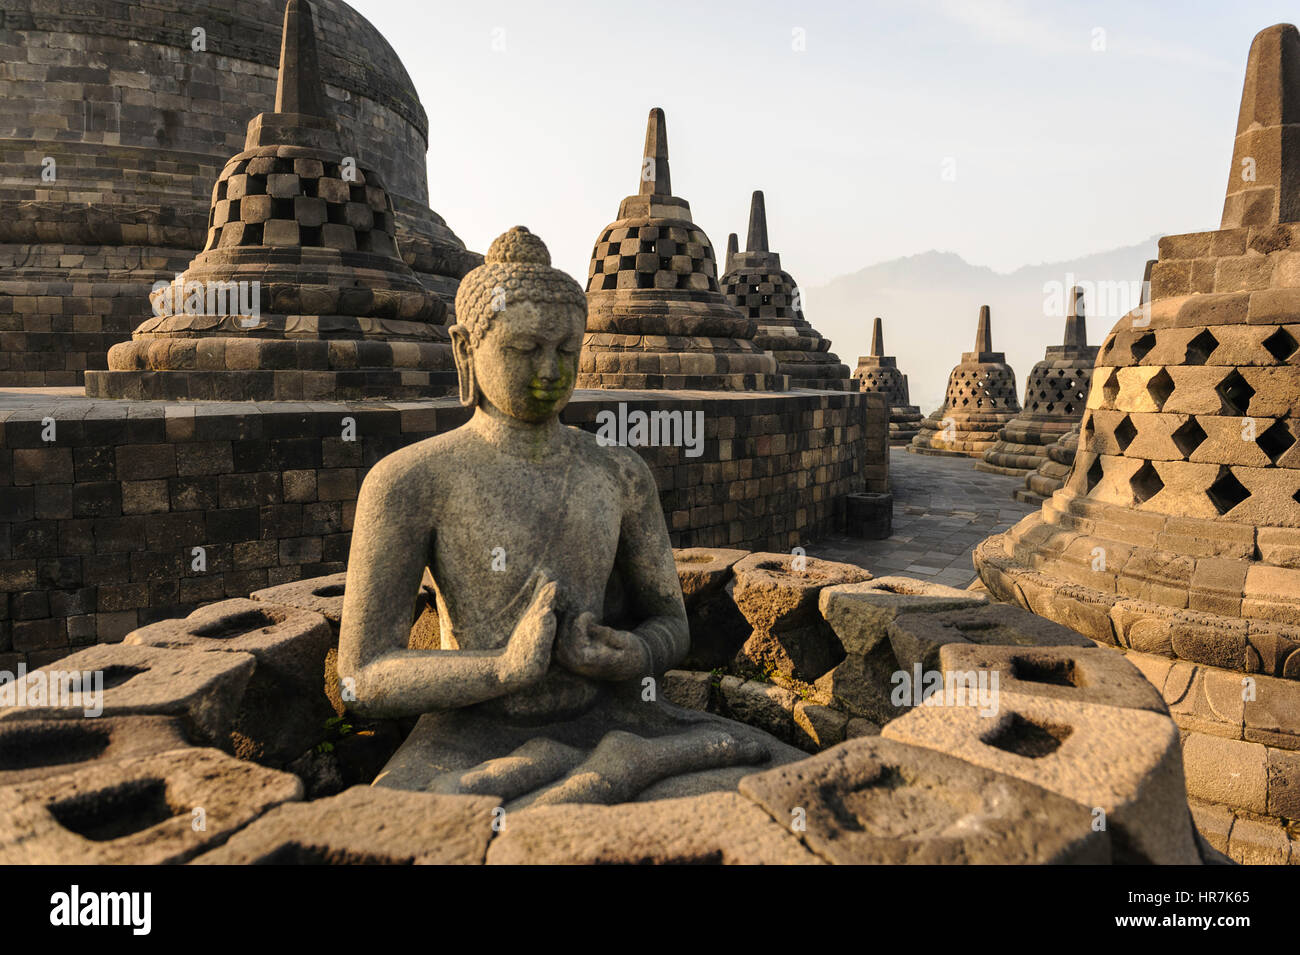 Statue of Budha in the famous temple of Borobudur. Stock Photo